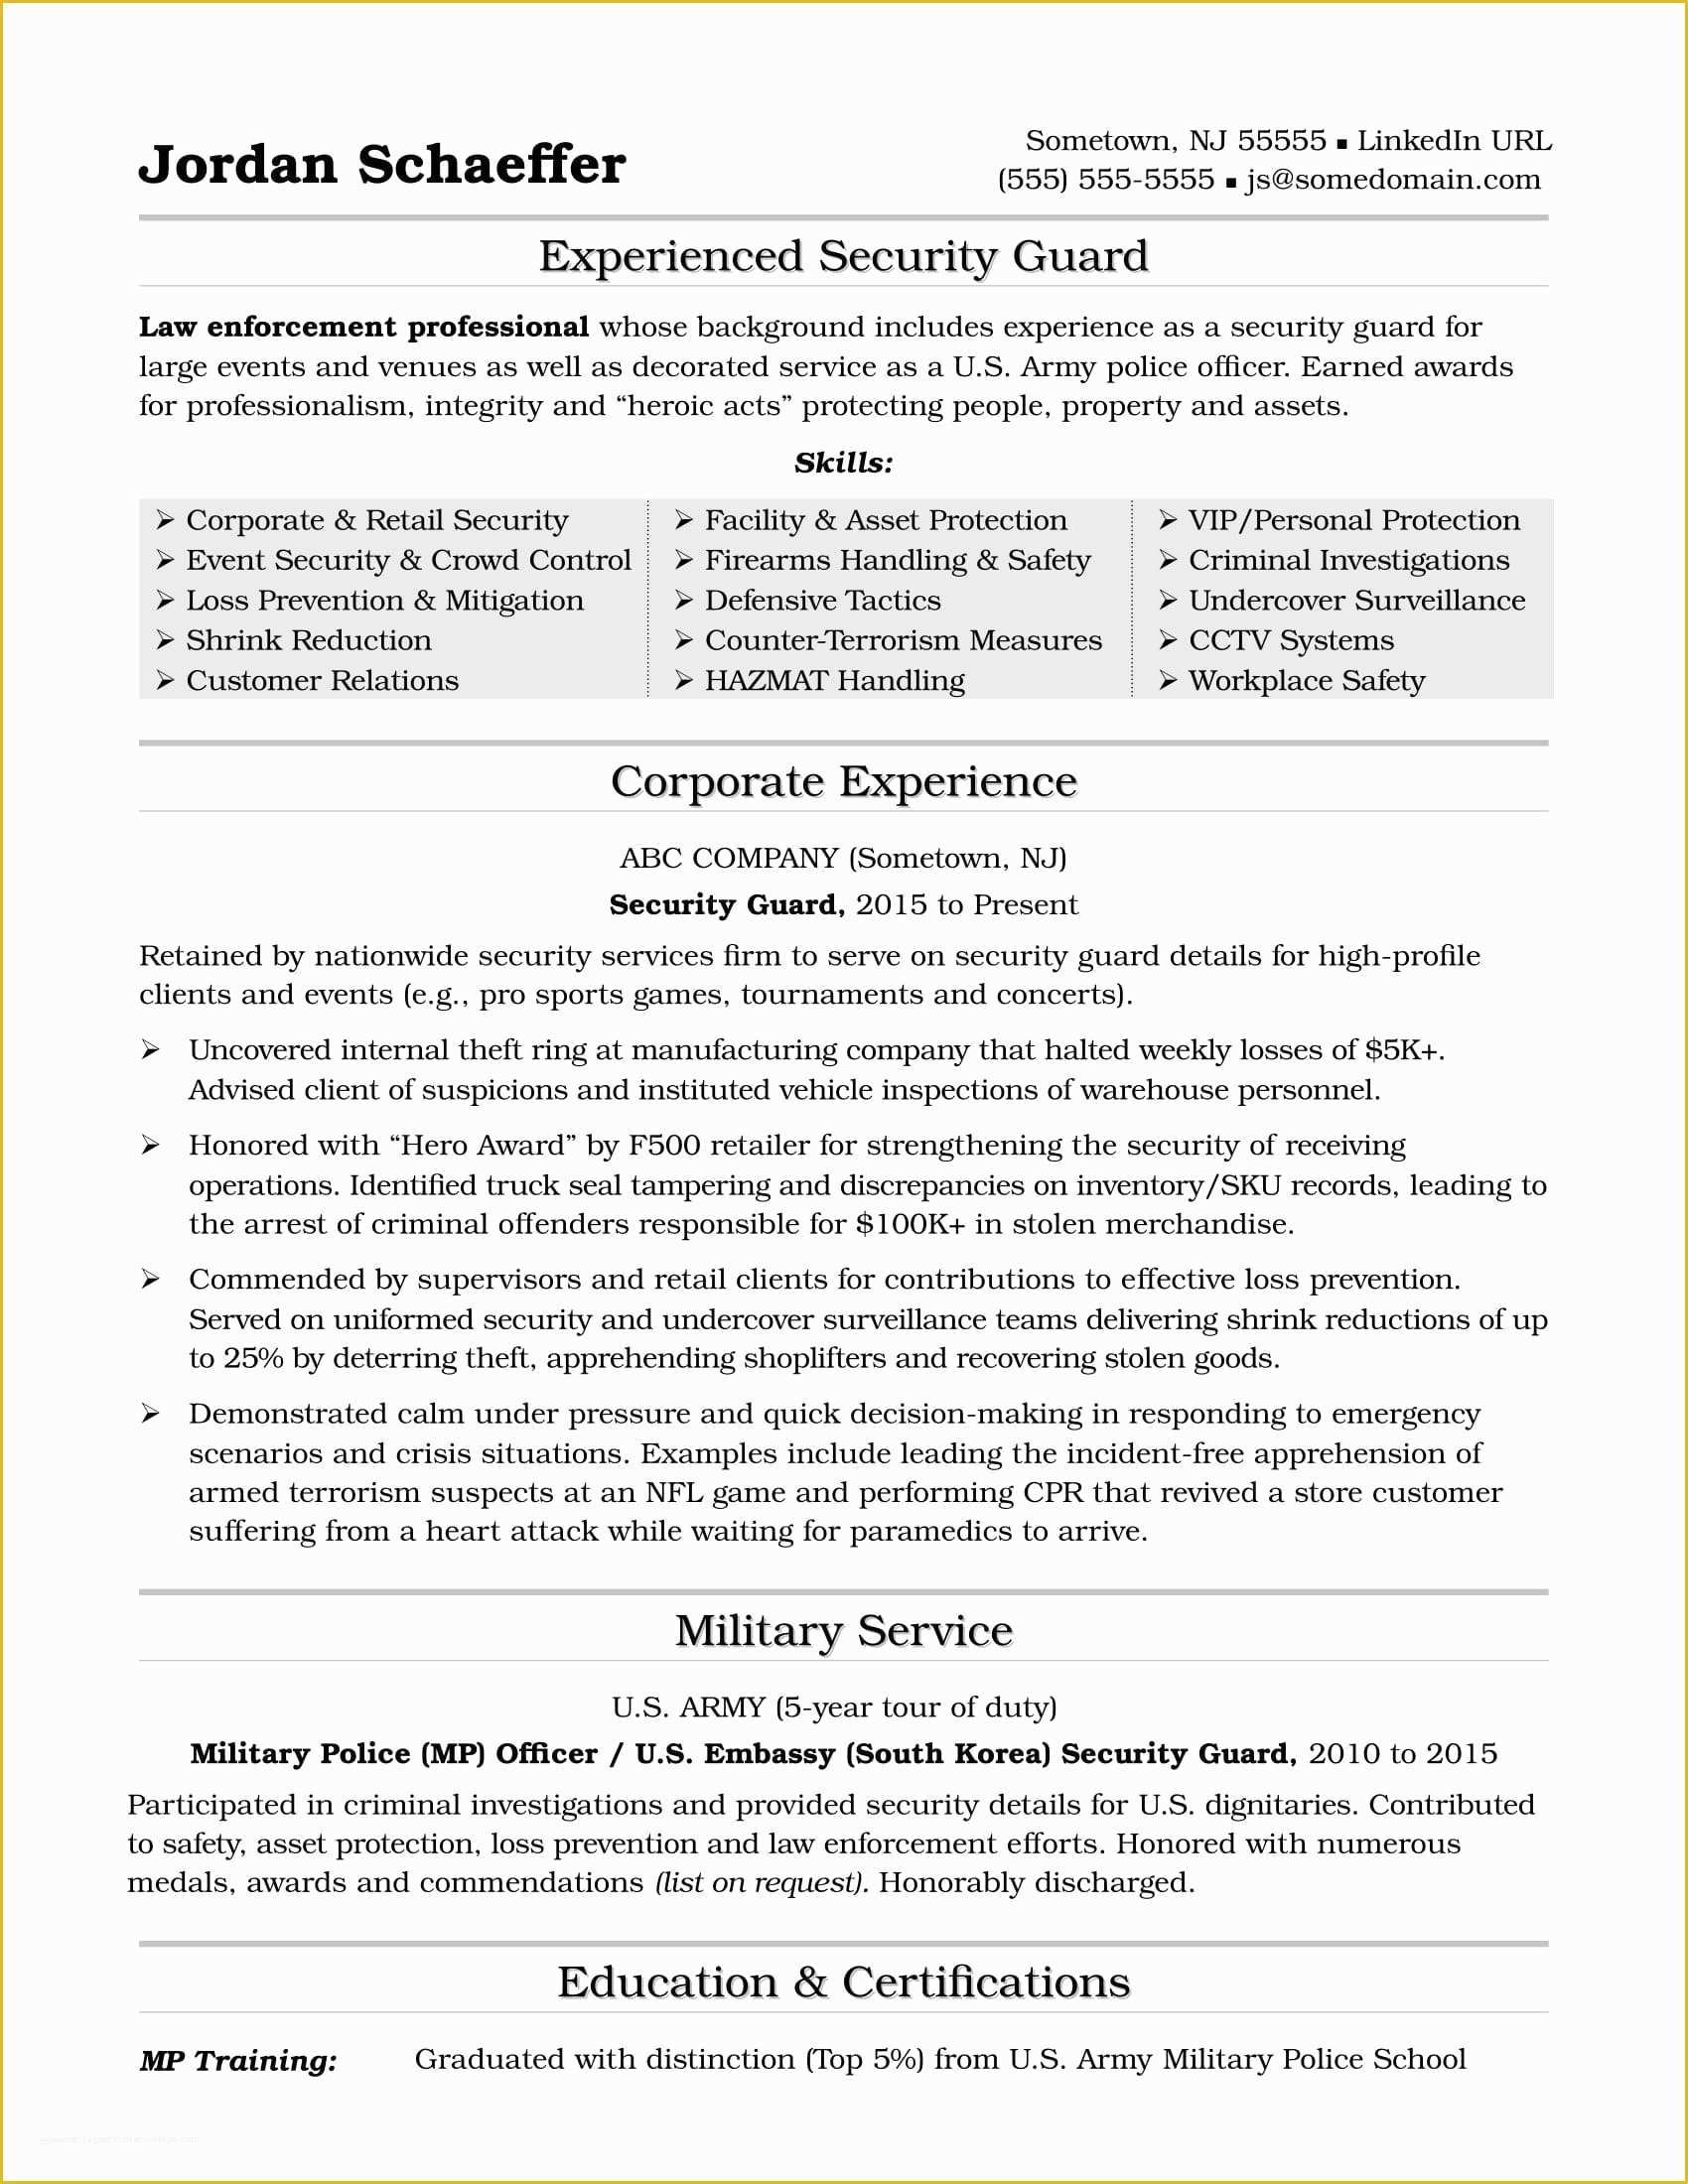 Security Resume Template Free Of Sample Security Guard Resume No Experience Best